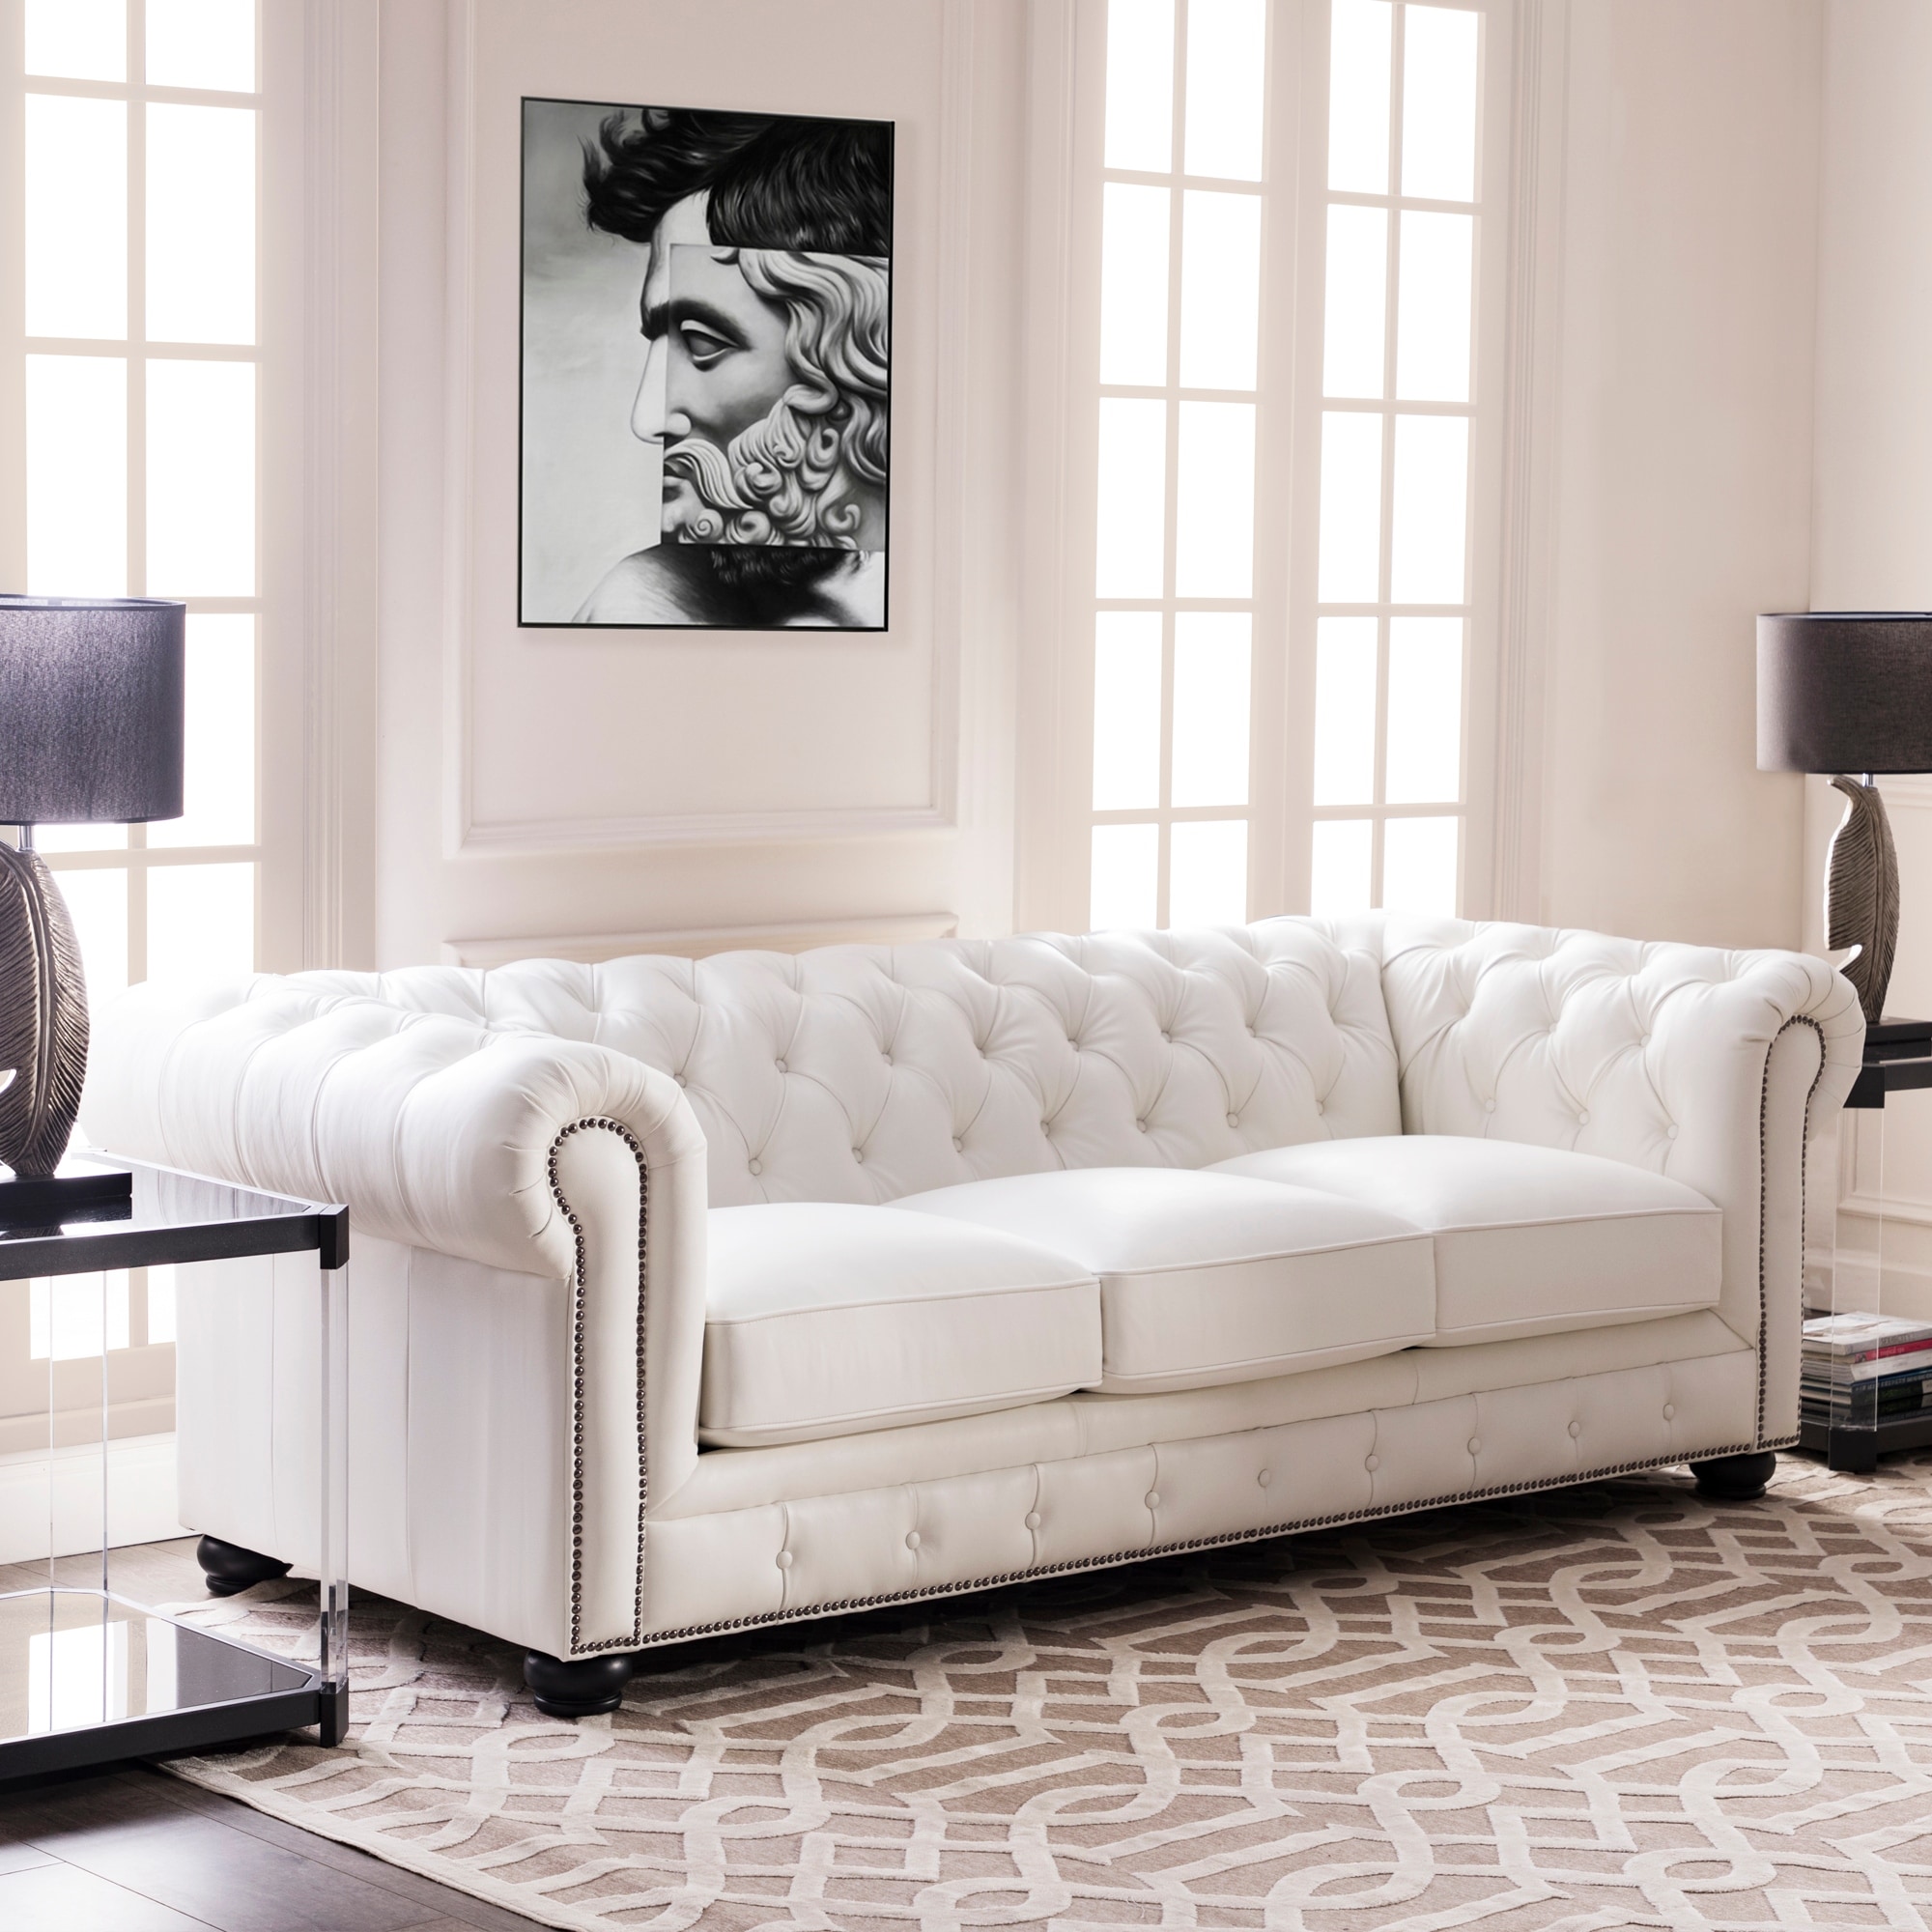 Copper Grove Kasama Chesterfield White Leather Sofa 95W X 405D X 305H On Sale Overstock 30268259